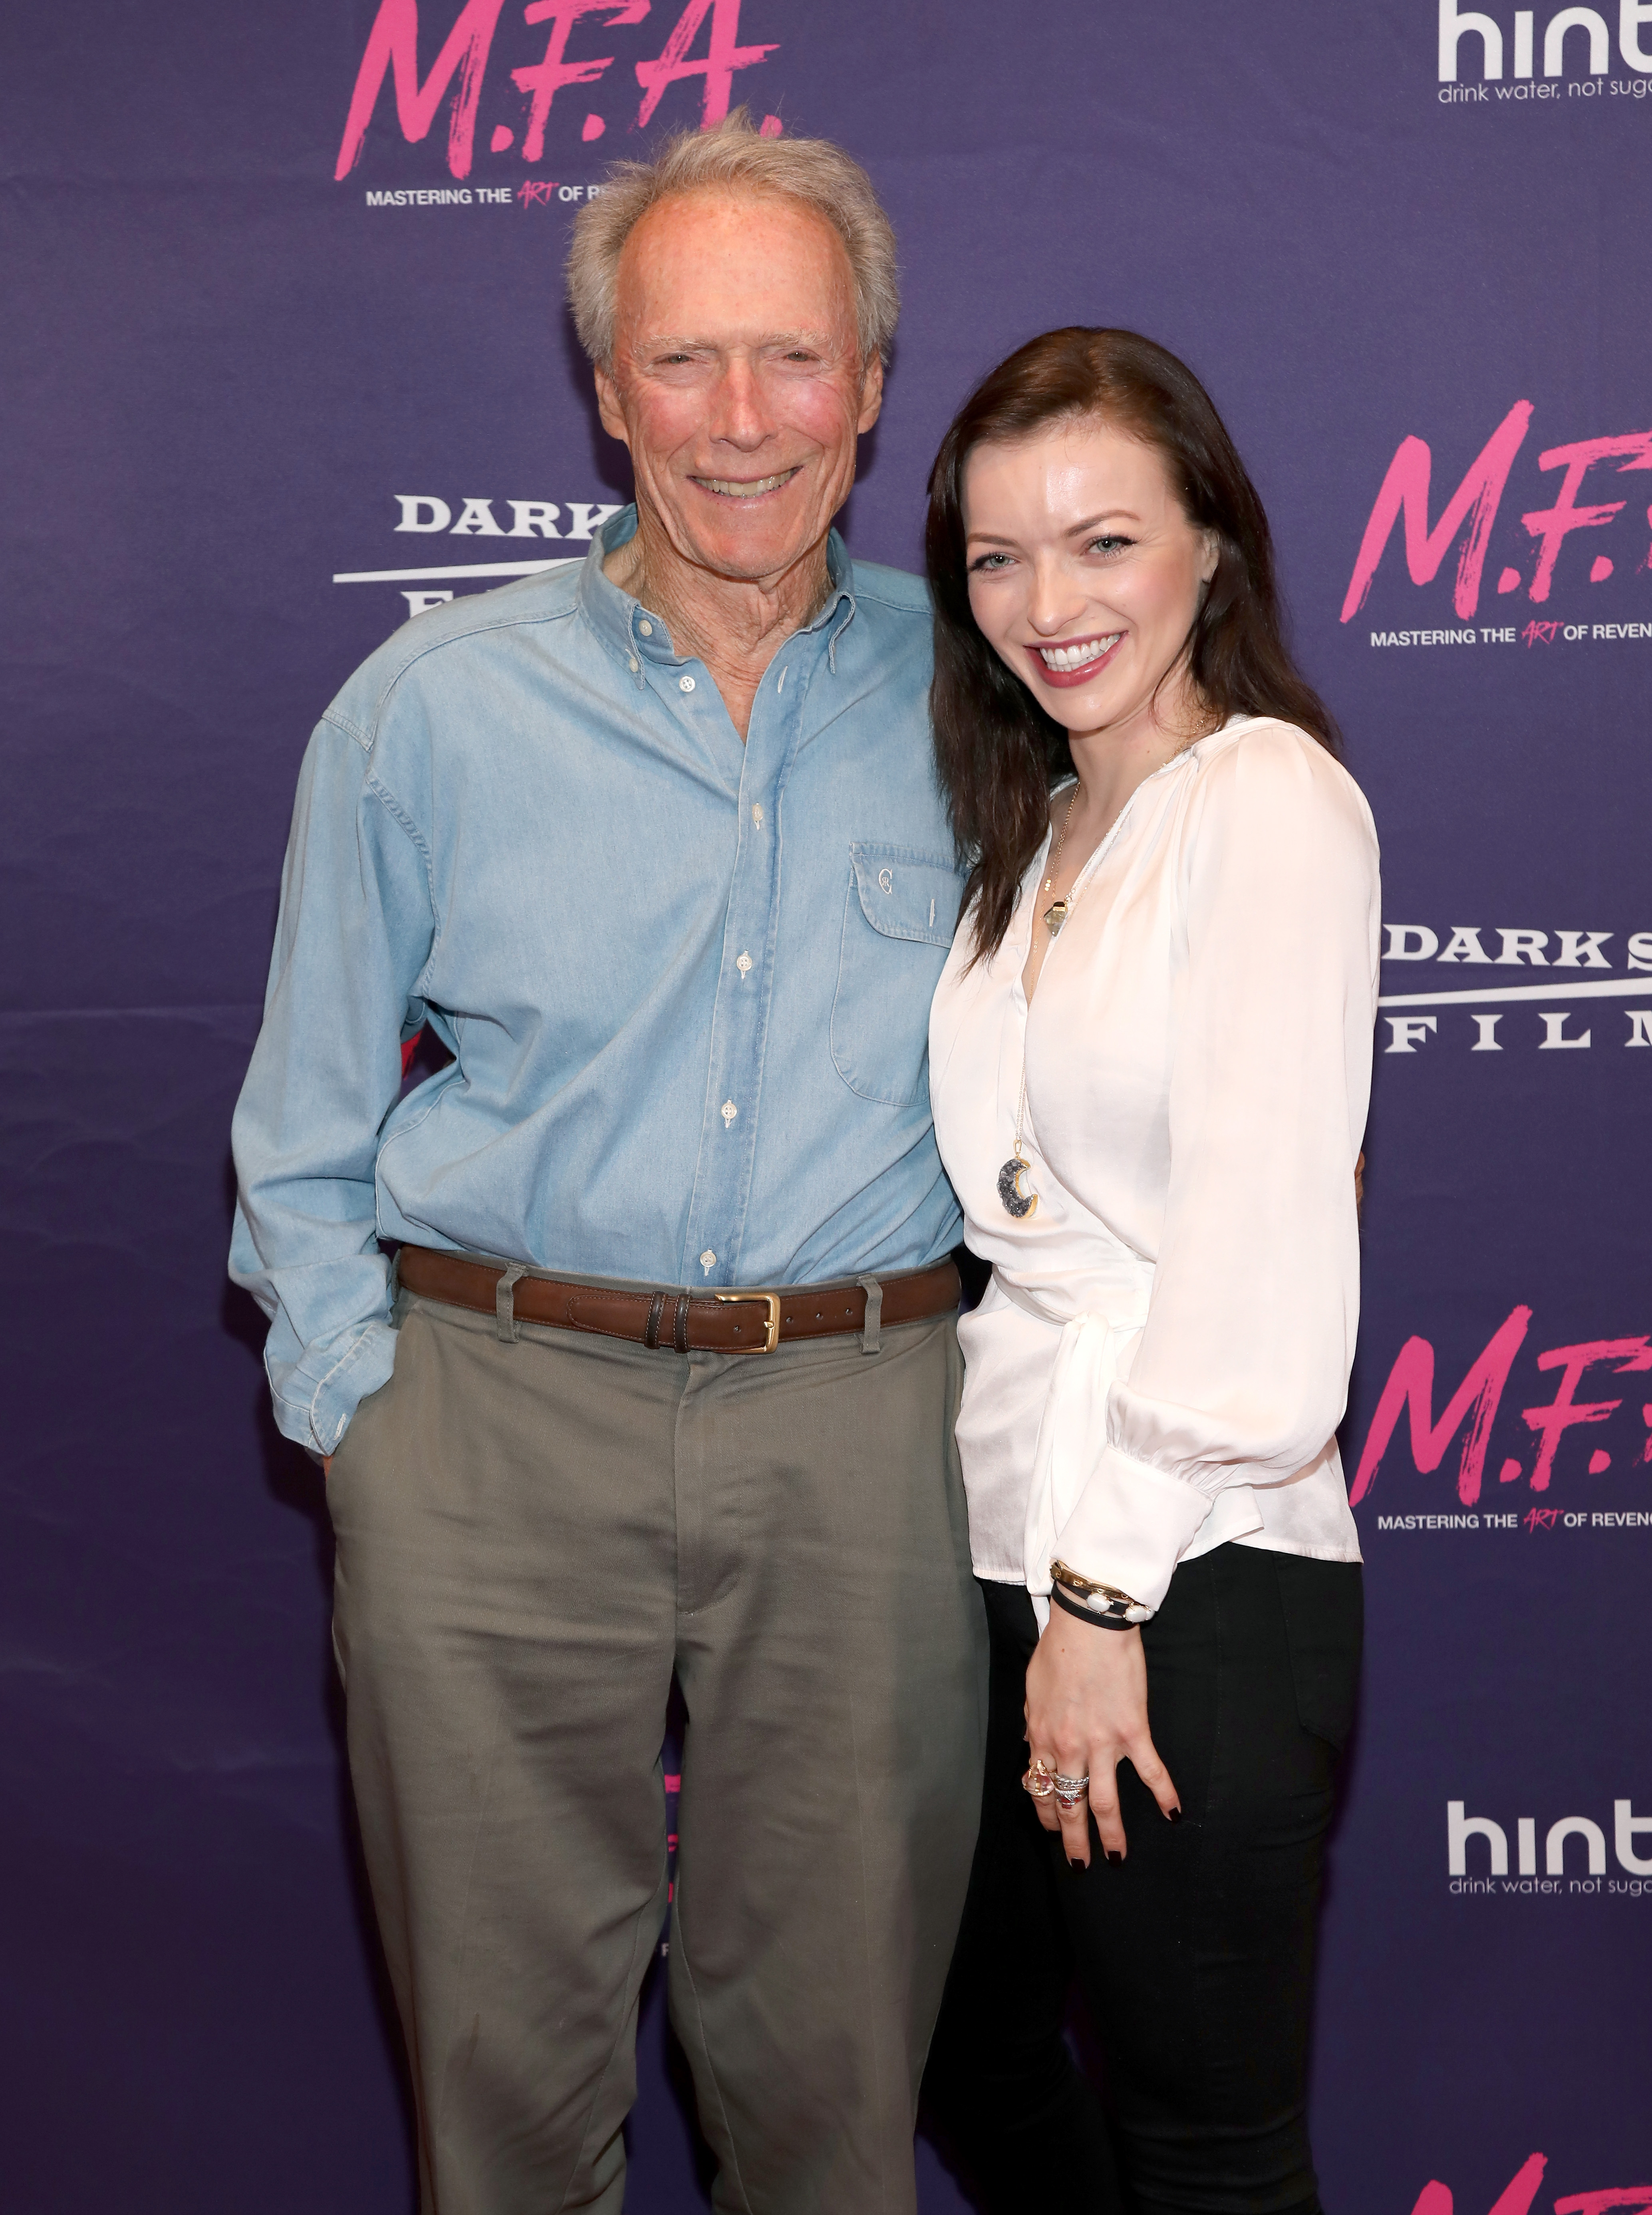 Clint and Francesca Eastwood at Dark Sky Films' premiere of "M.F.A." in 2017. | Source: Getty Images